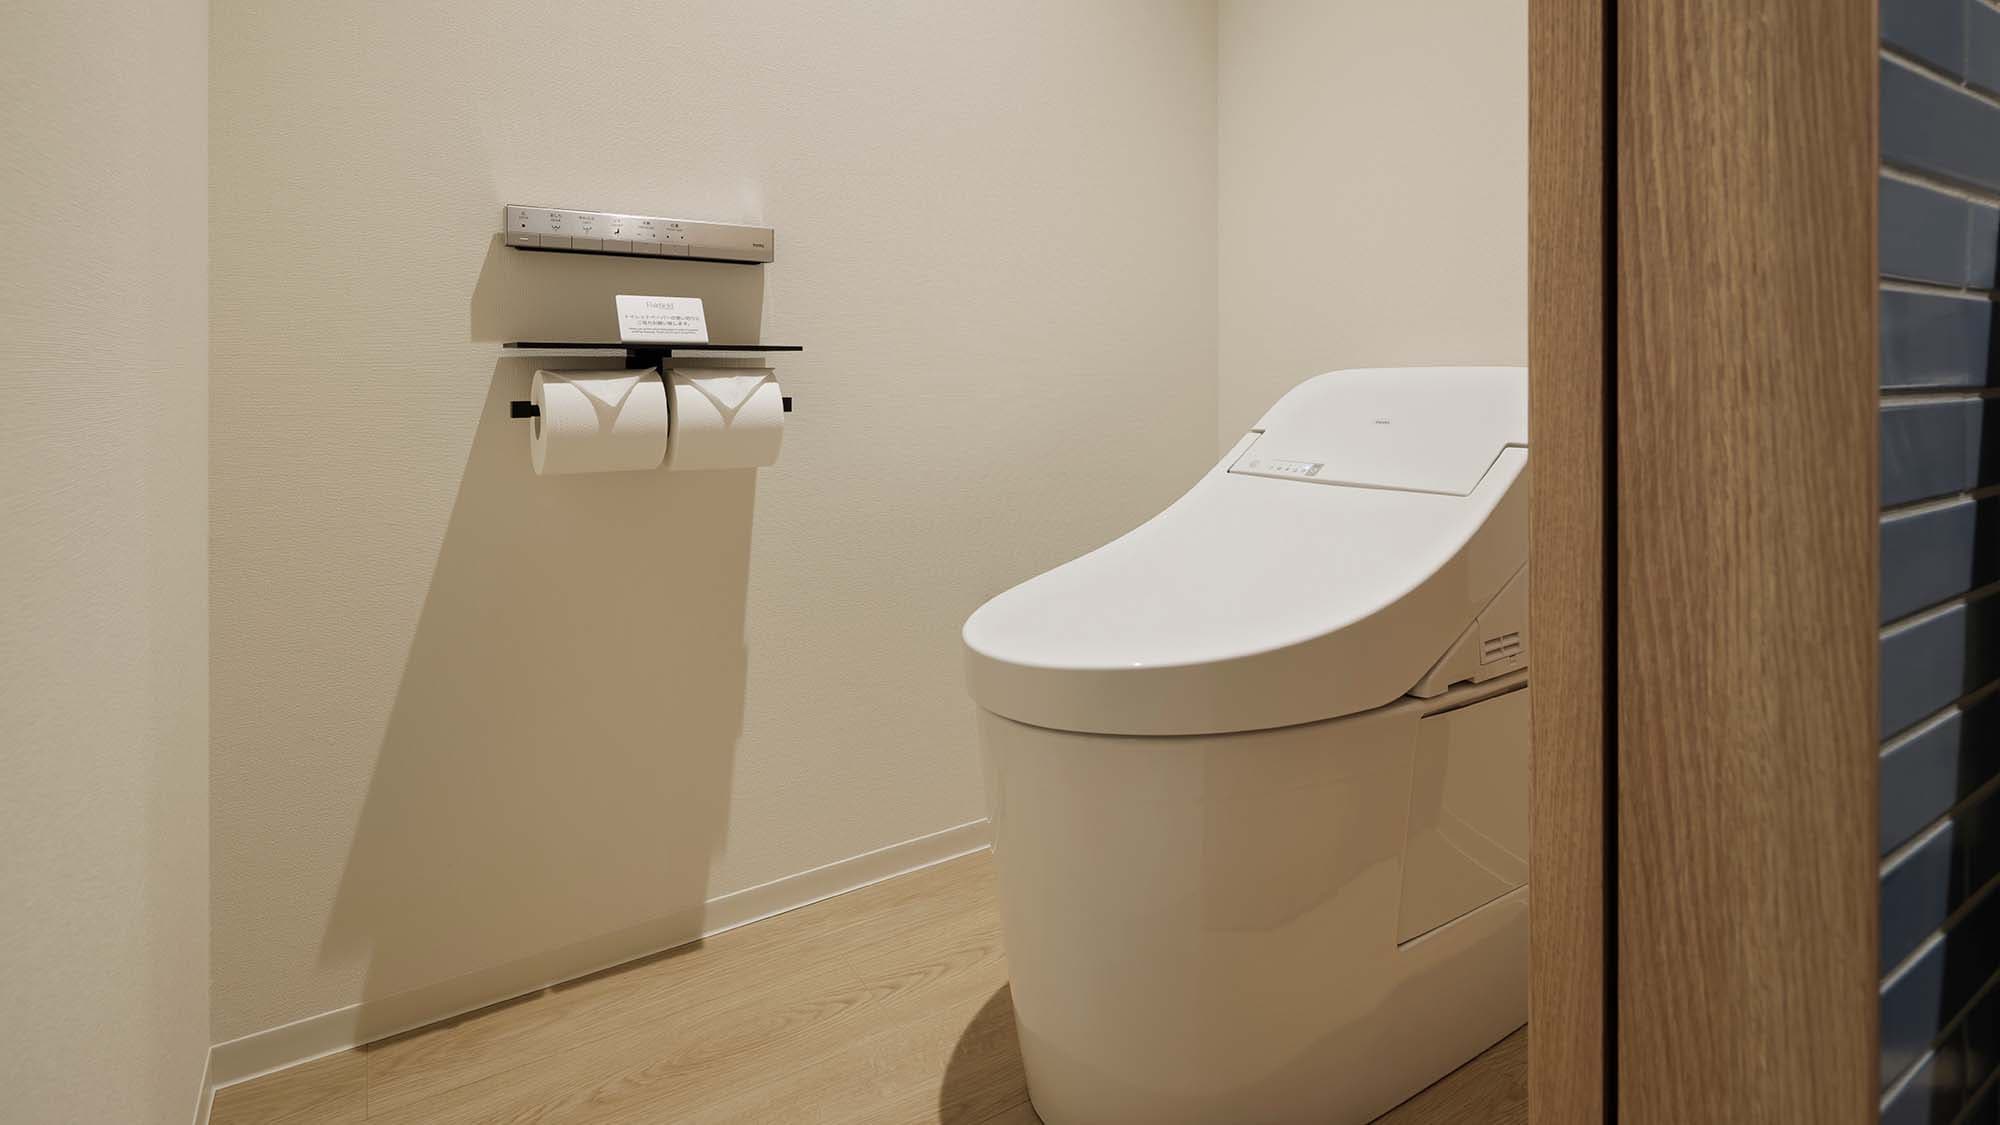 Bathroom: The bath and toilet are separate, so you can use your time effectively when preparing for your morning outing.